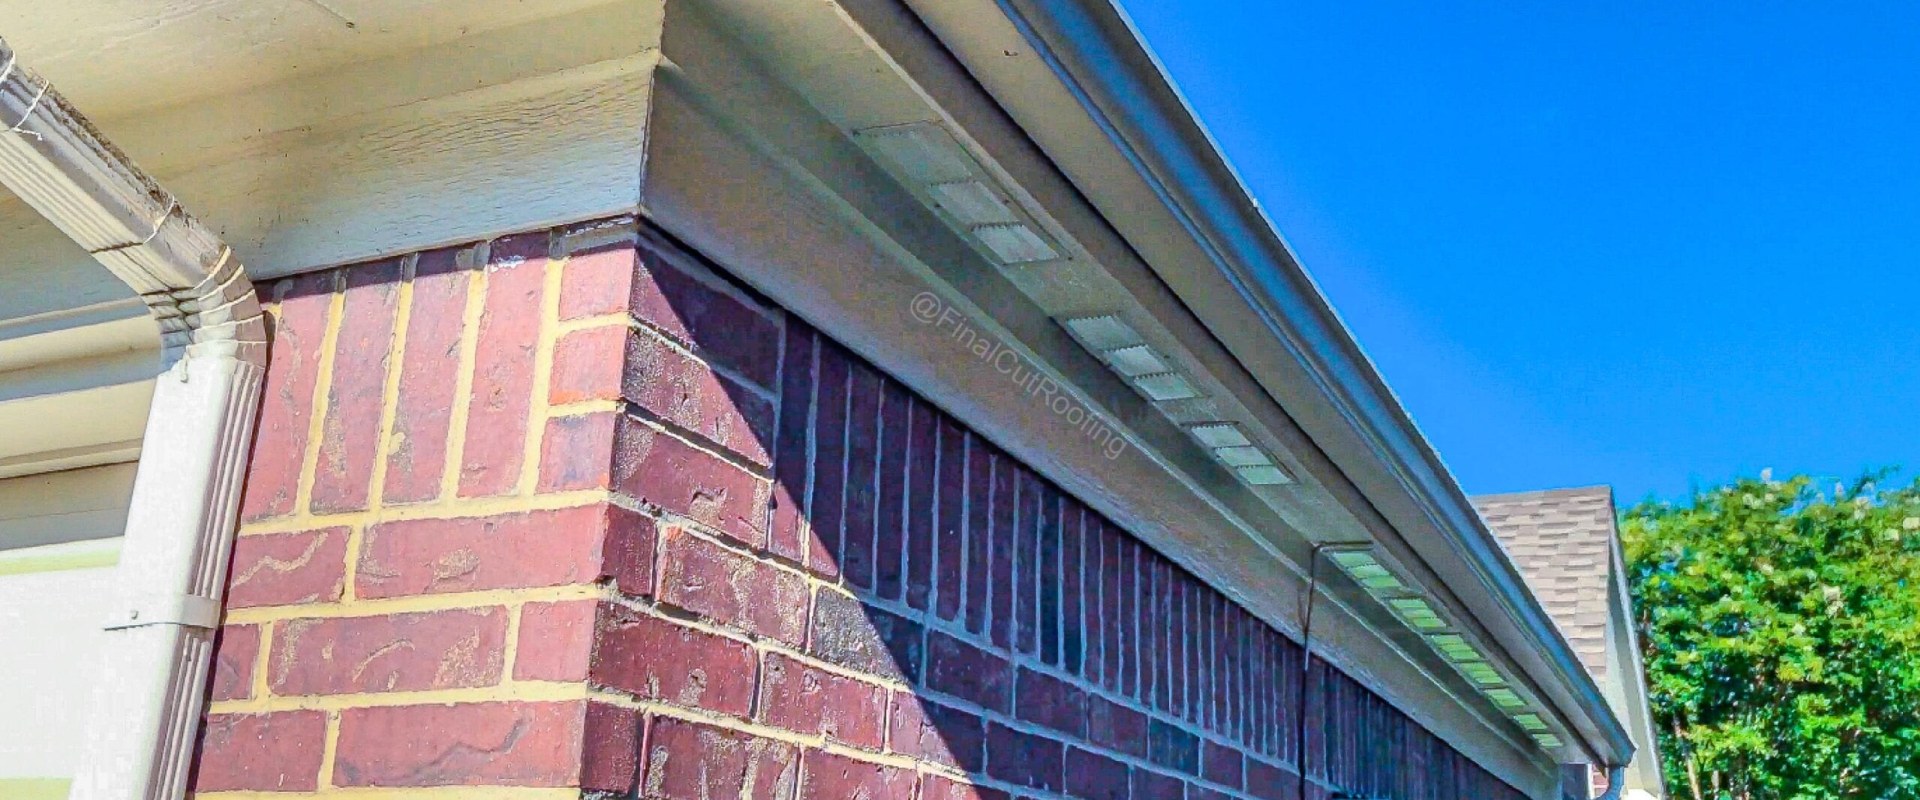 Installing Soffit Vents on Your Roof: What You Need to Know